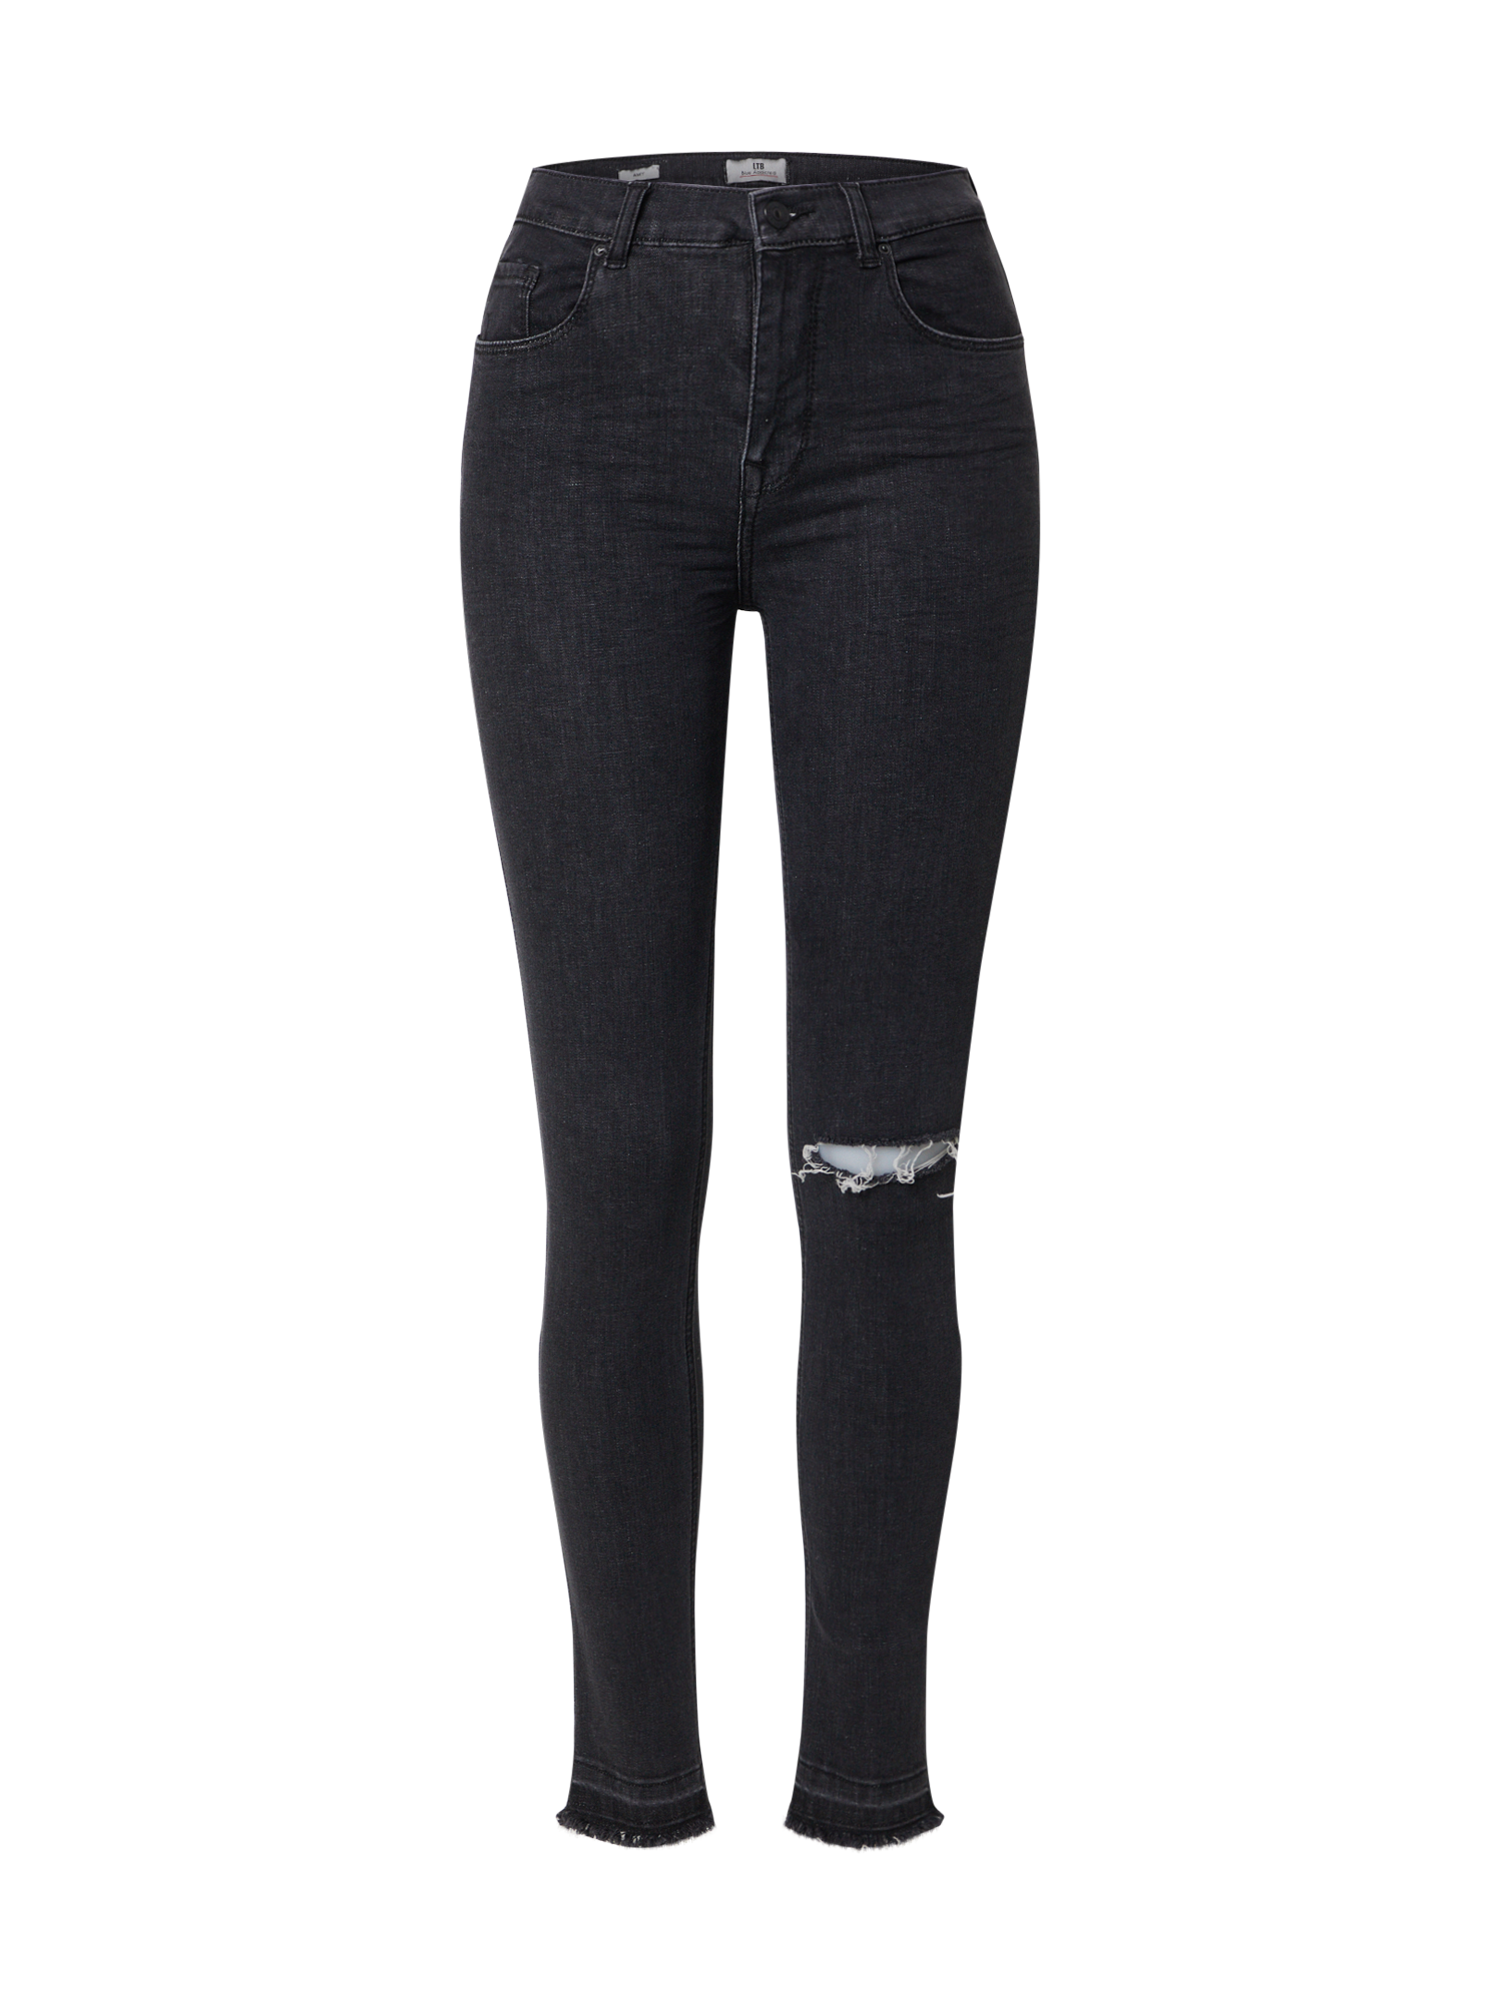 KrIZv Donna LTB Jeans Amy in Blu Notte 